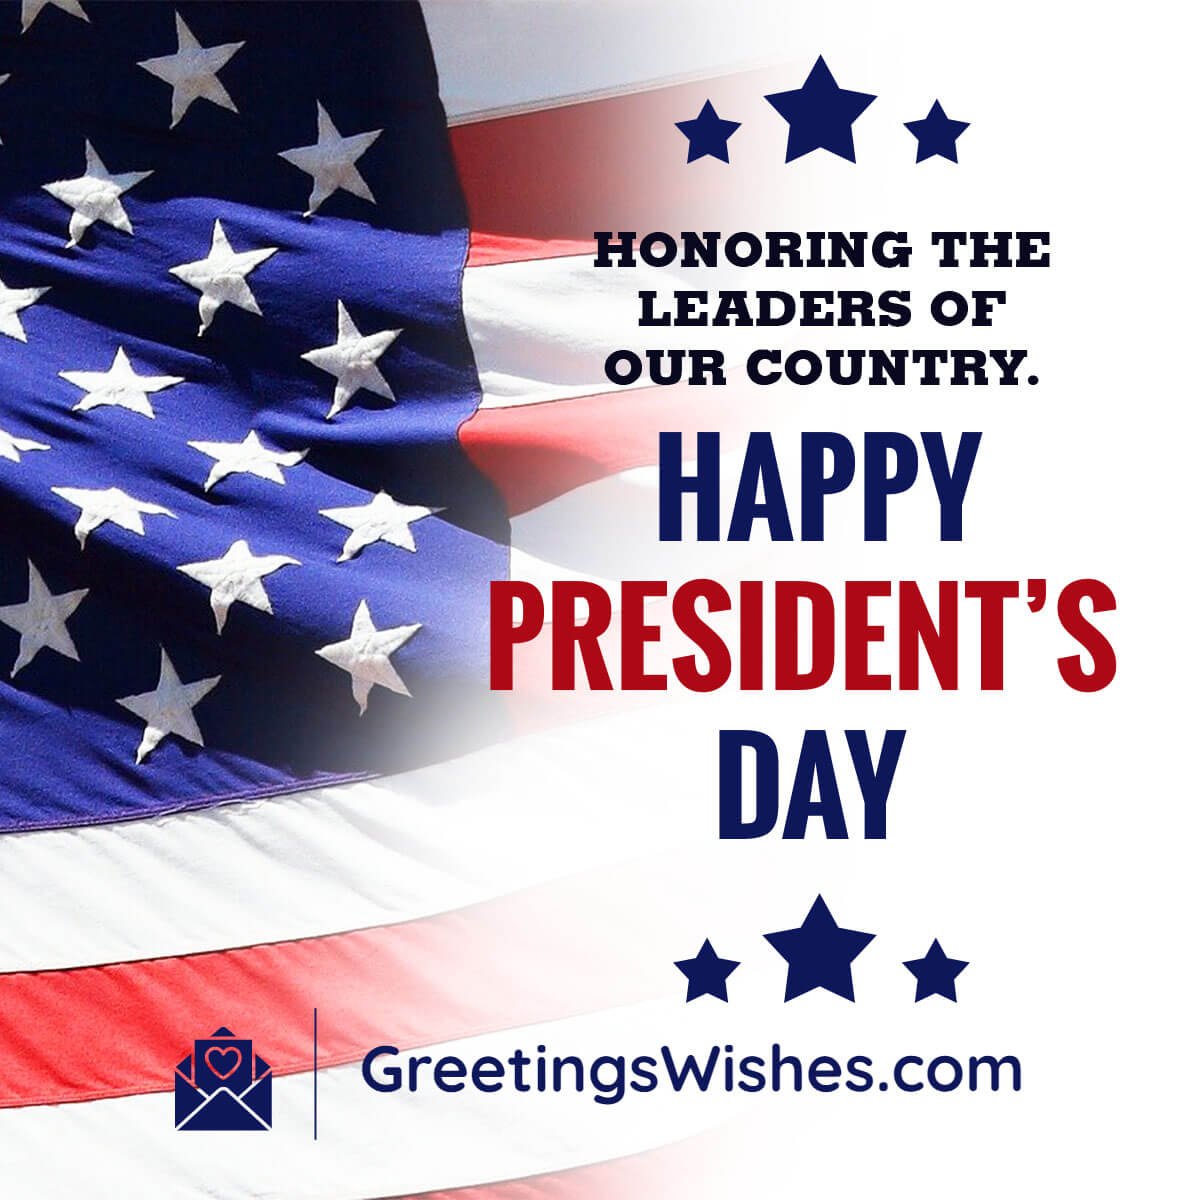 Presidents Day Greetings